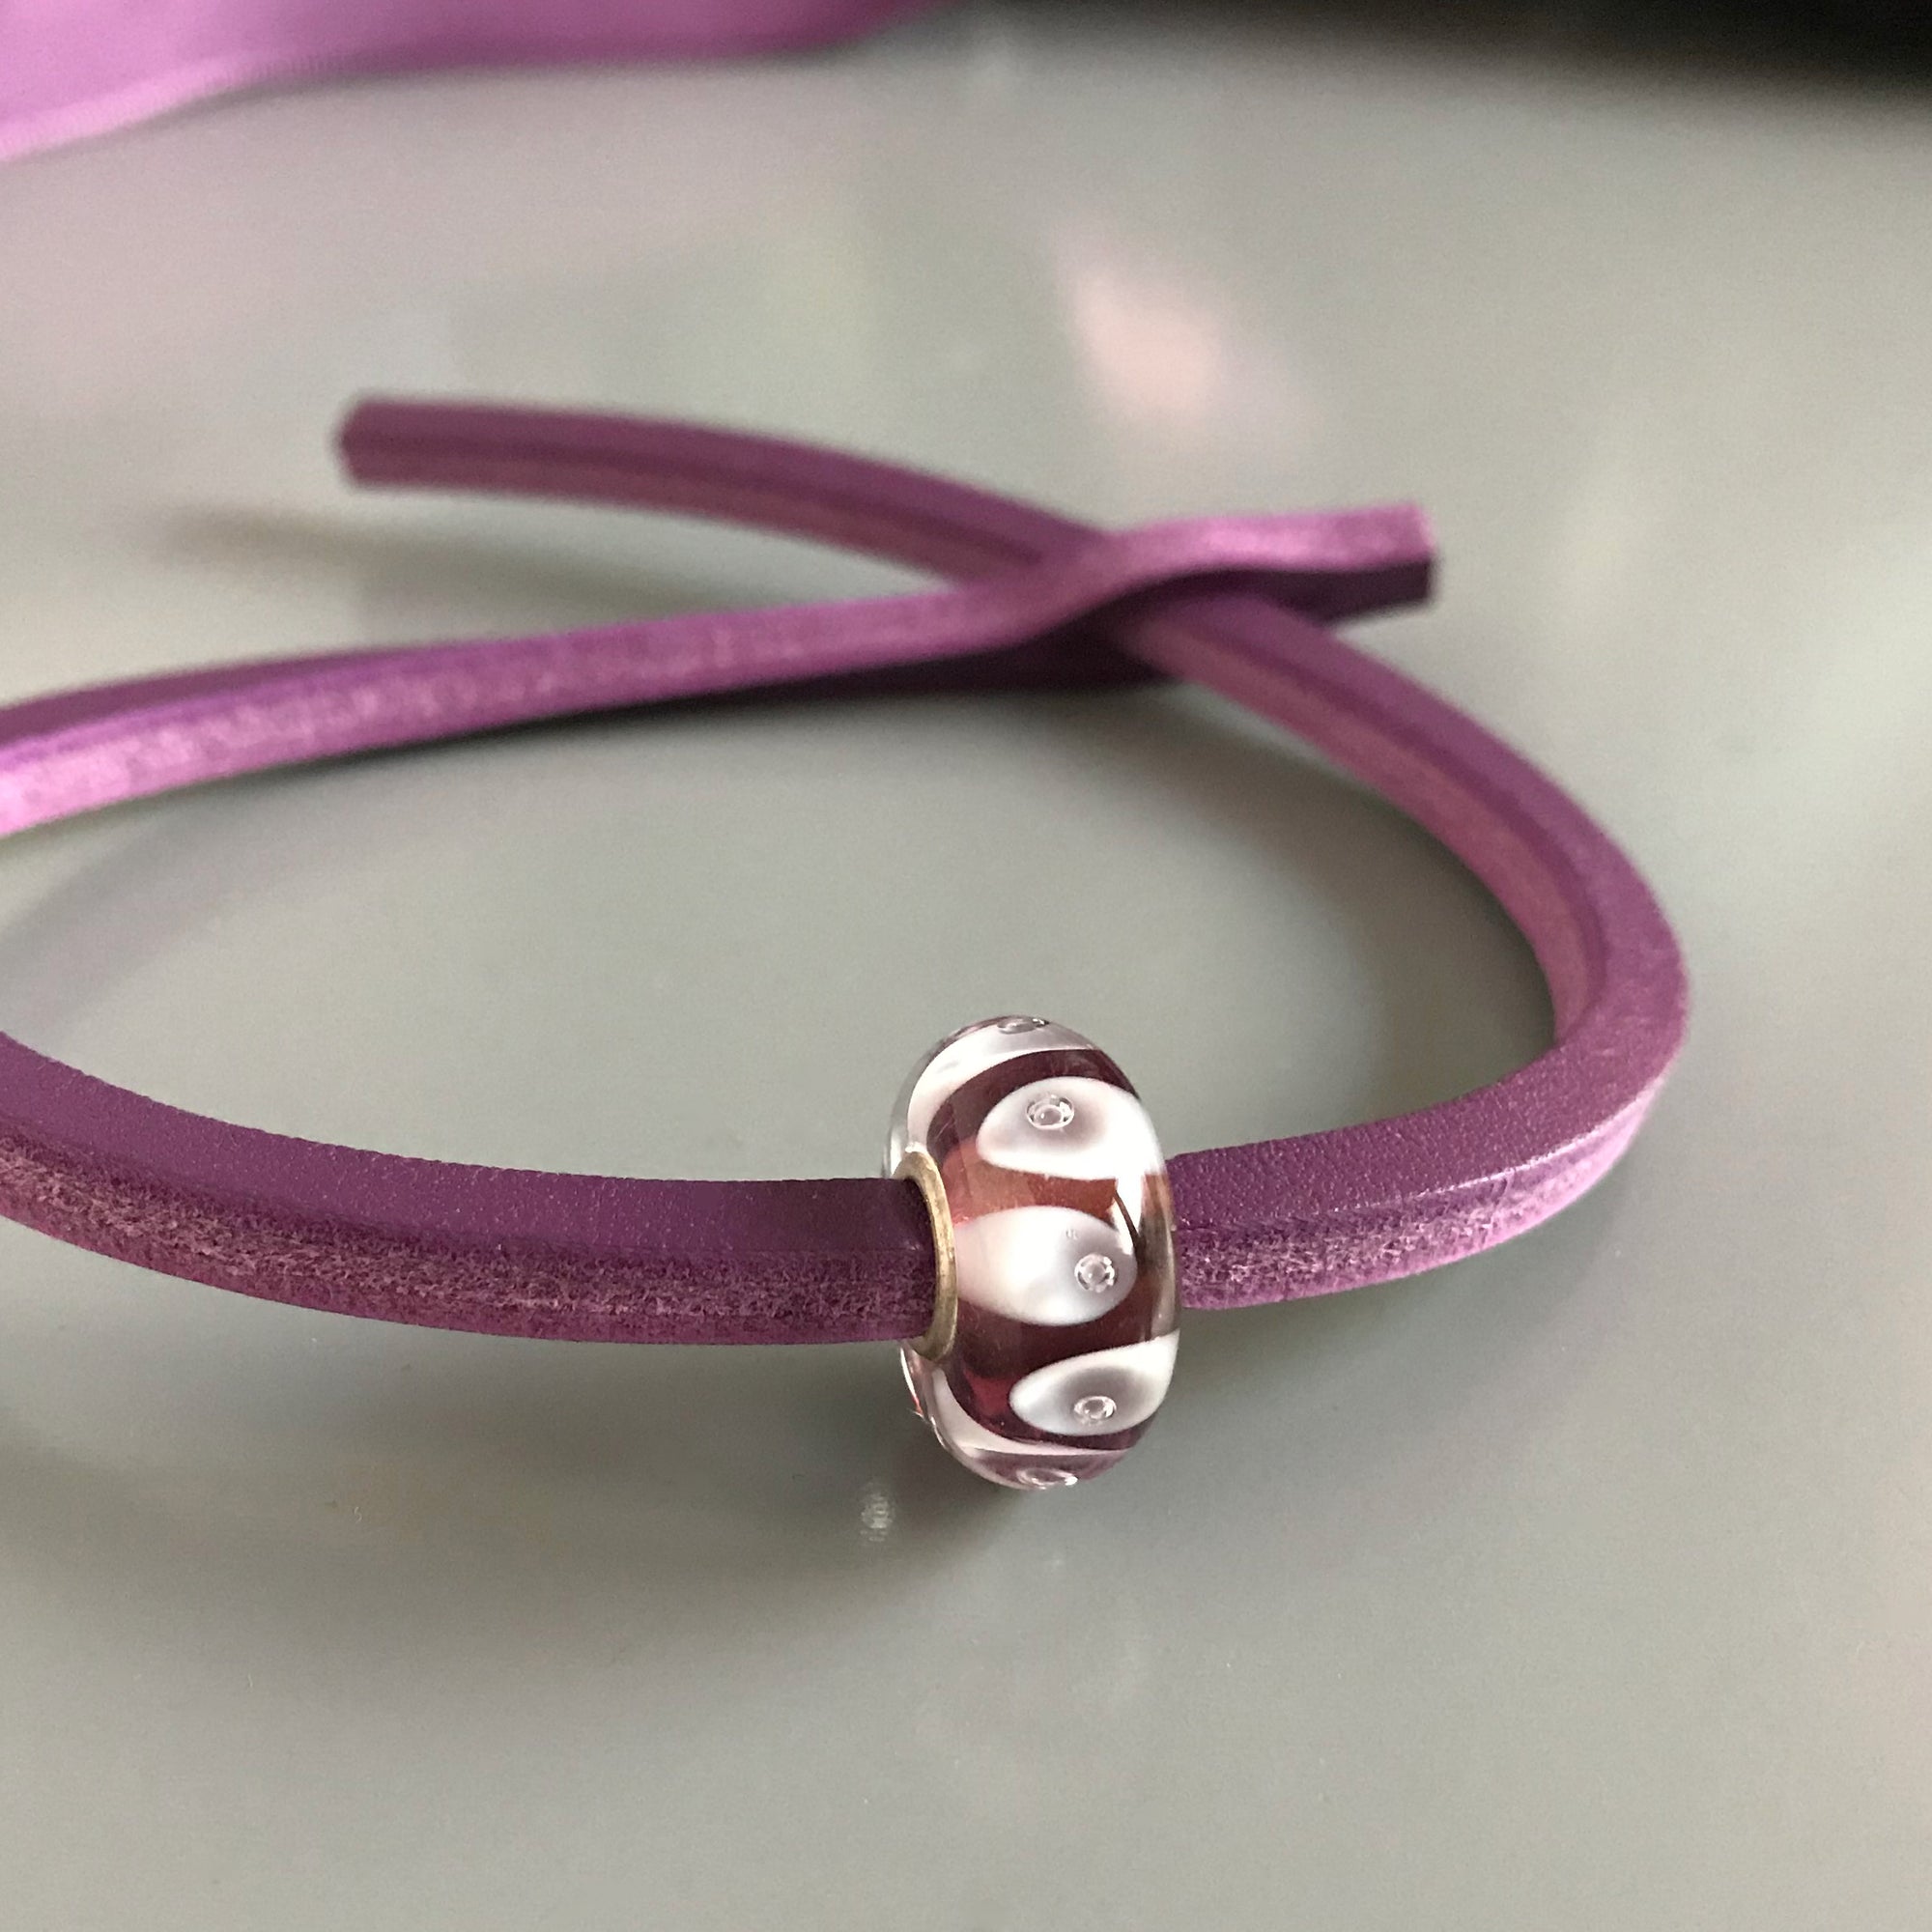 Trollbeads UNIQUES are one-of-a-kind glass beads hand made individually by 100% artisan-owned workshops in Tibet, India, Malawi and Lithuania. This Suzie Q Studio UNIQUES glass bead has white bubbles dancing on a transparent amethyst-coloured background and includesa leather bracelet.